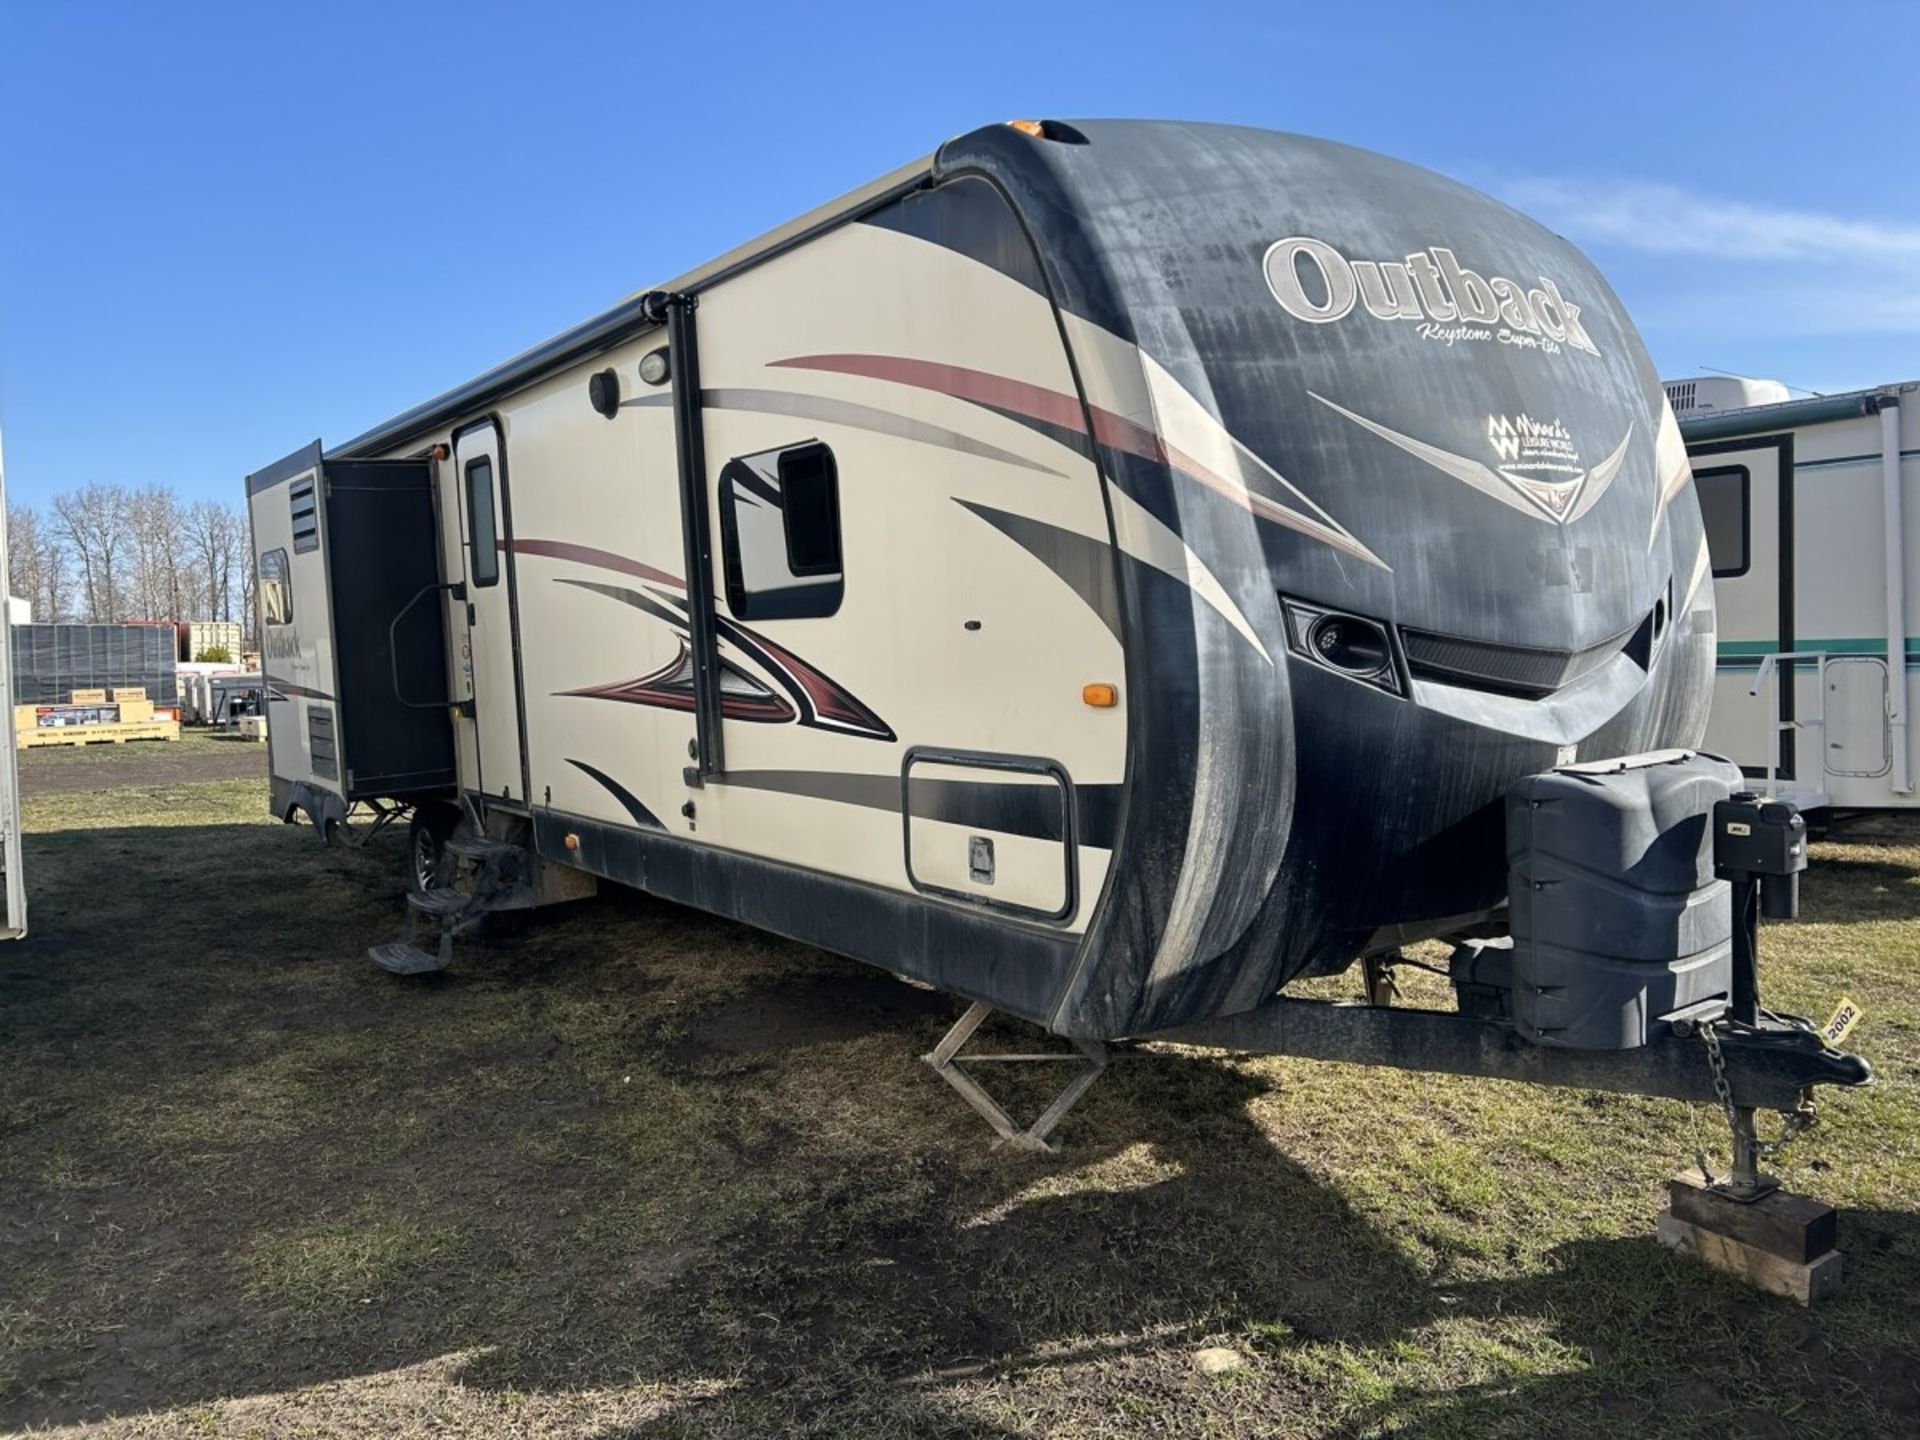 2014 OUTBACK KEYSTONE SUPER-LITE 33 FT HOLIDAY TRAILER, DOUBLE SLIDE, POWER AWNING, OUTDOOR KITCHEN,